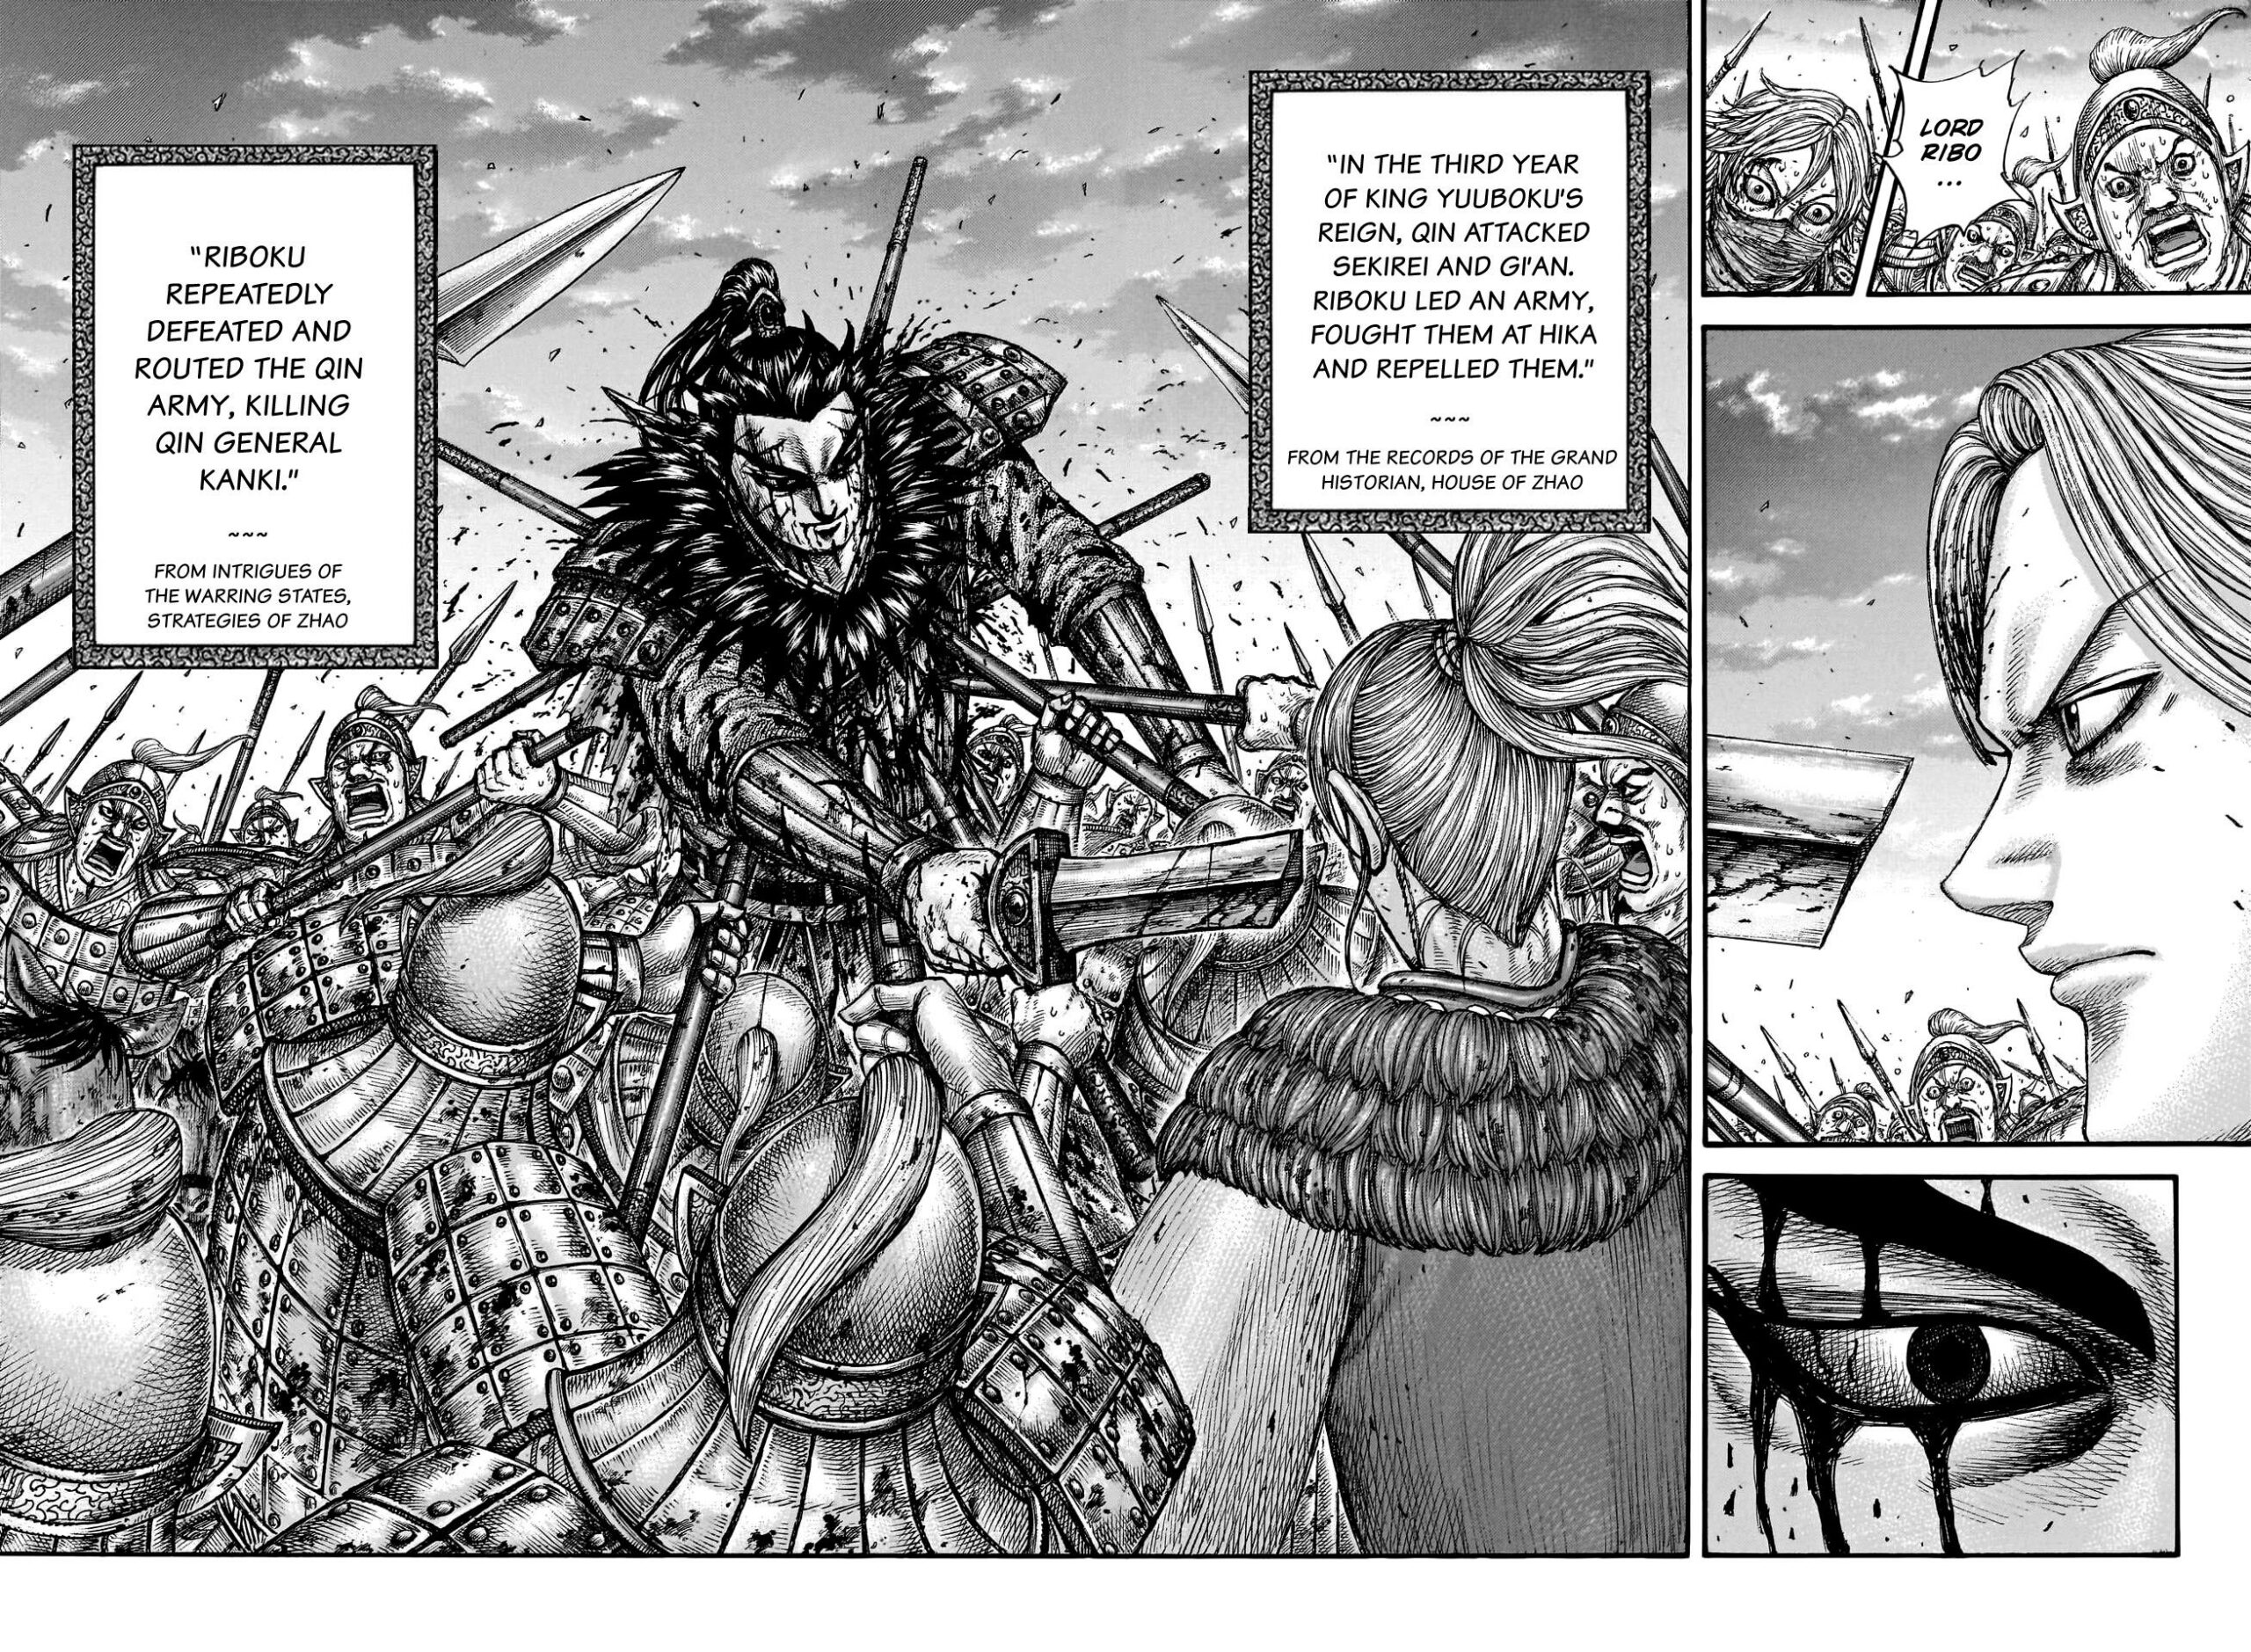 Kingdom Chapter 756 Spoilers, Raw Scans and more!